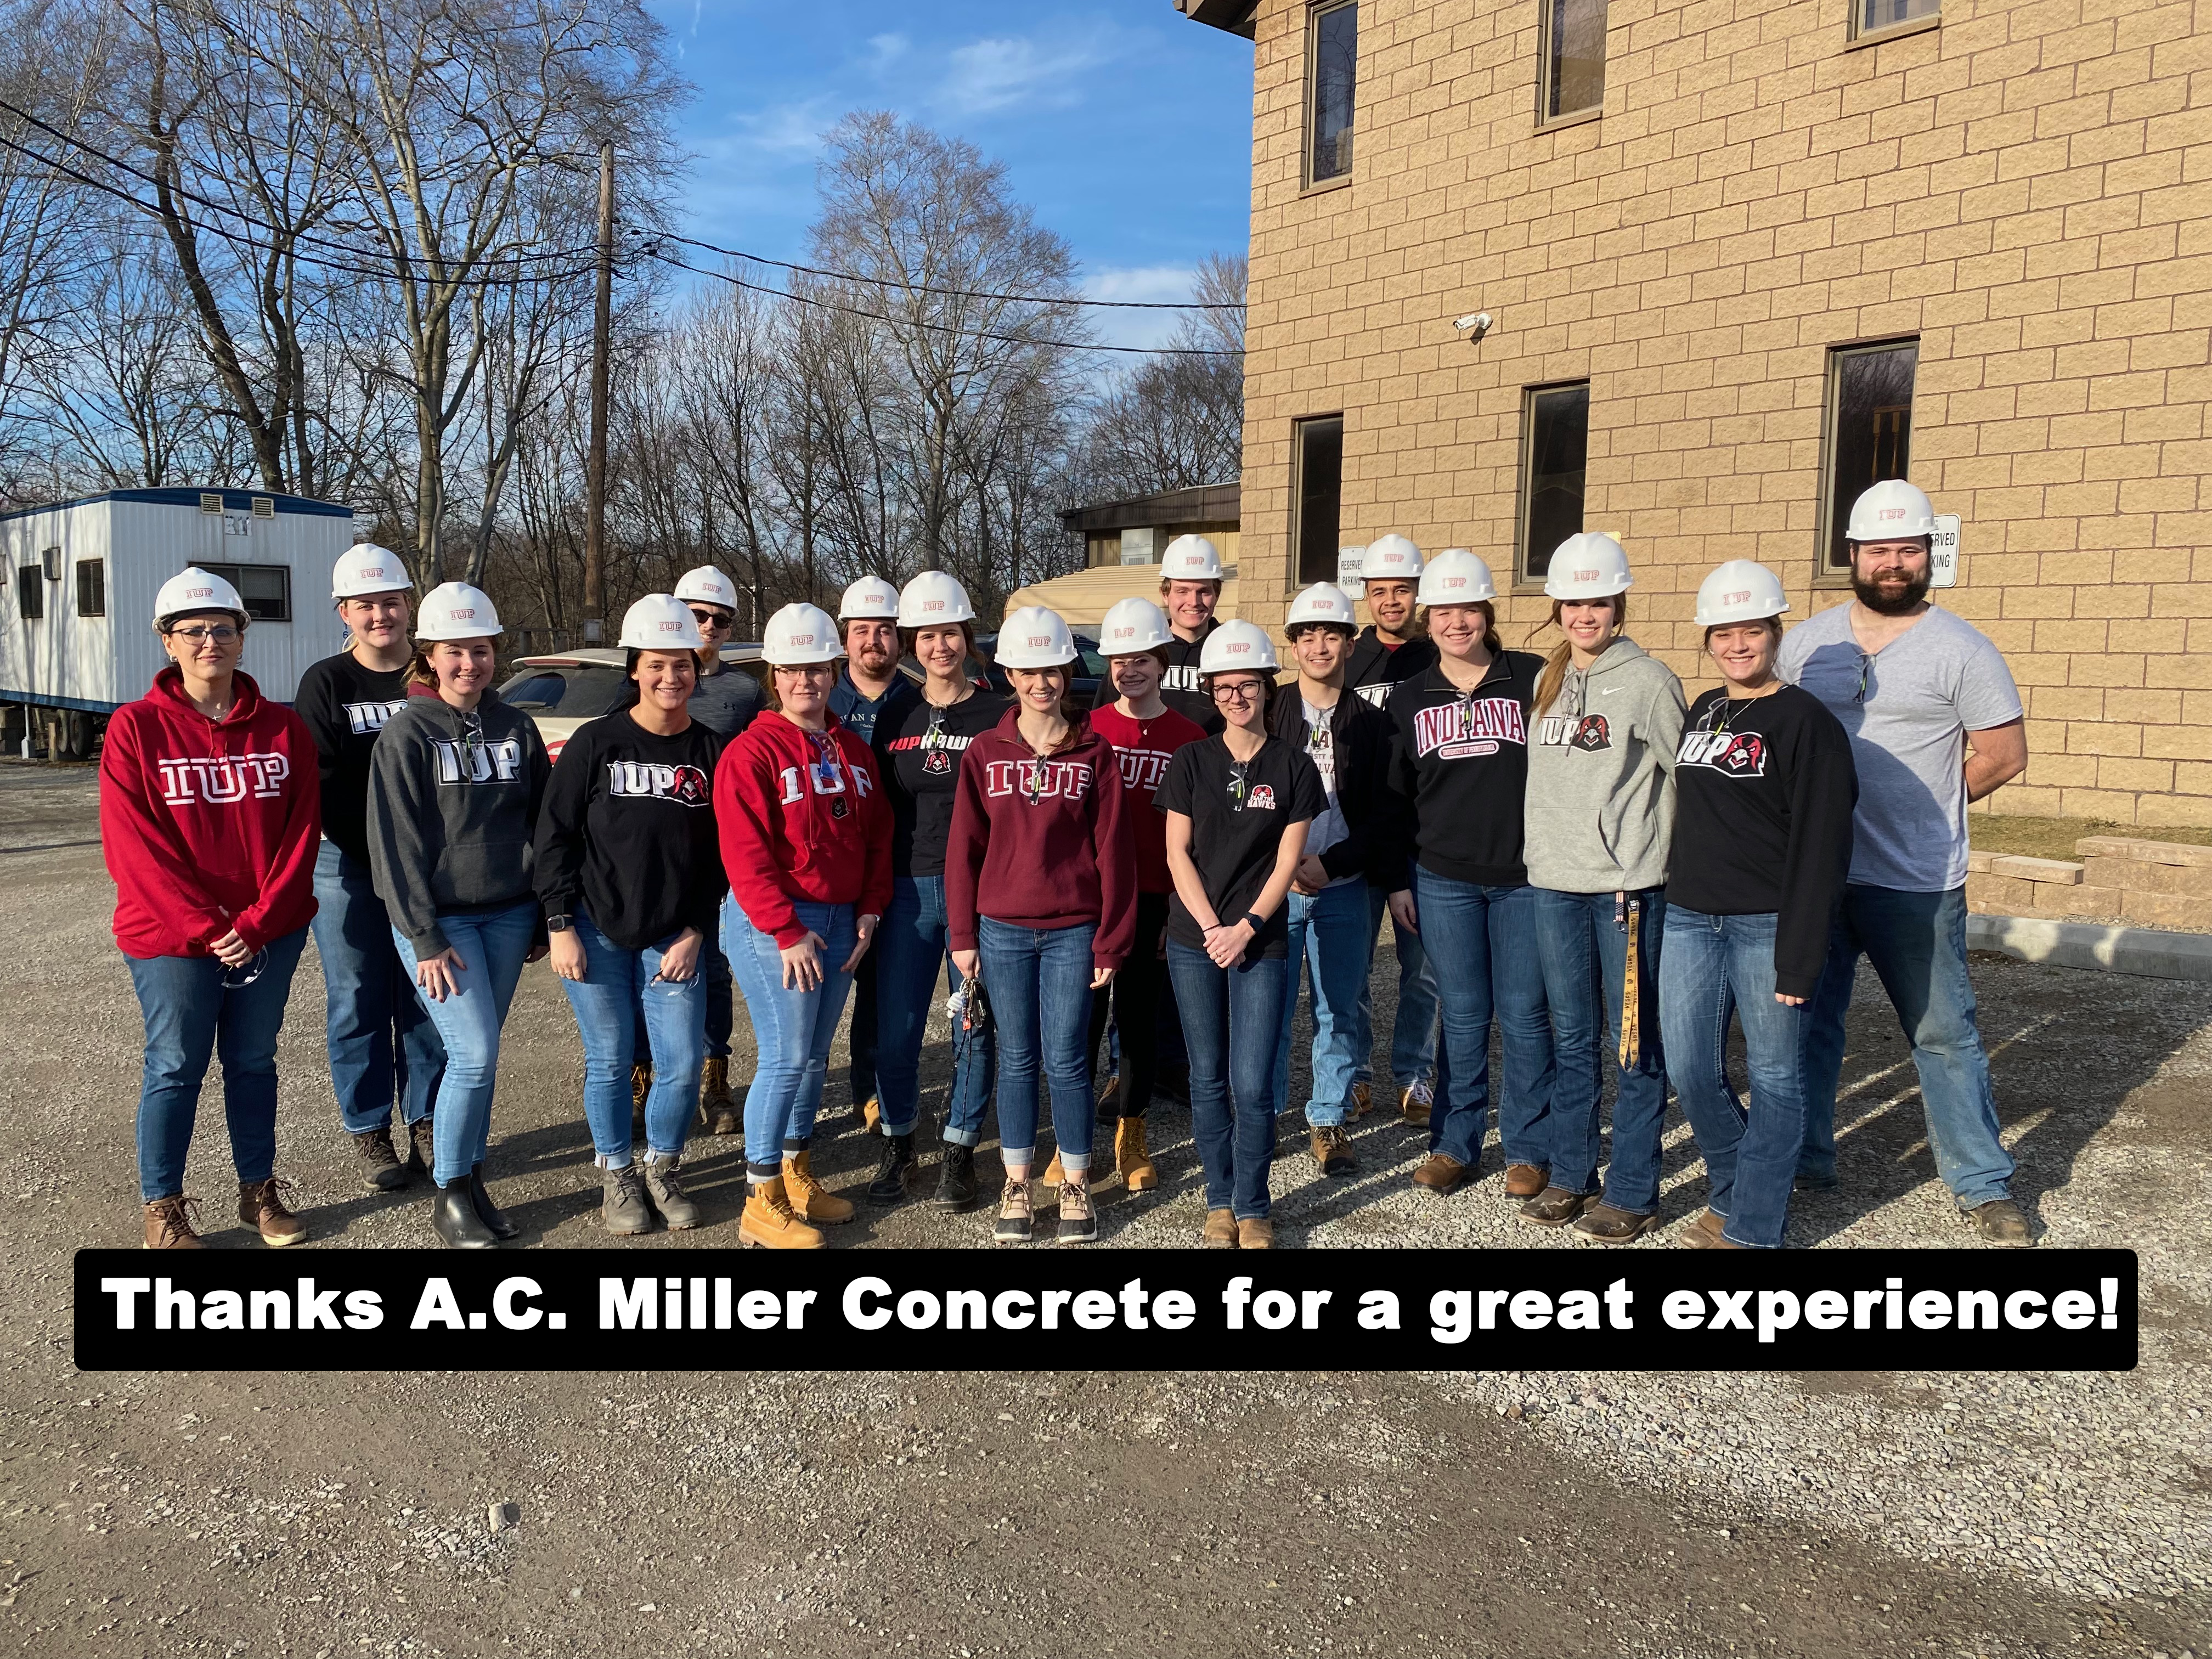 group photo with the text thanks ac miller concrete for a great experience